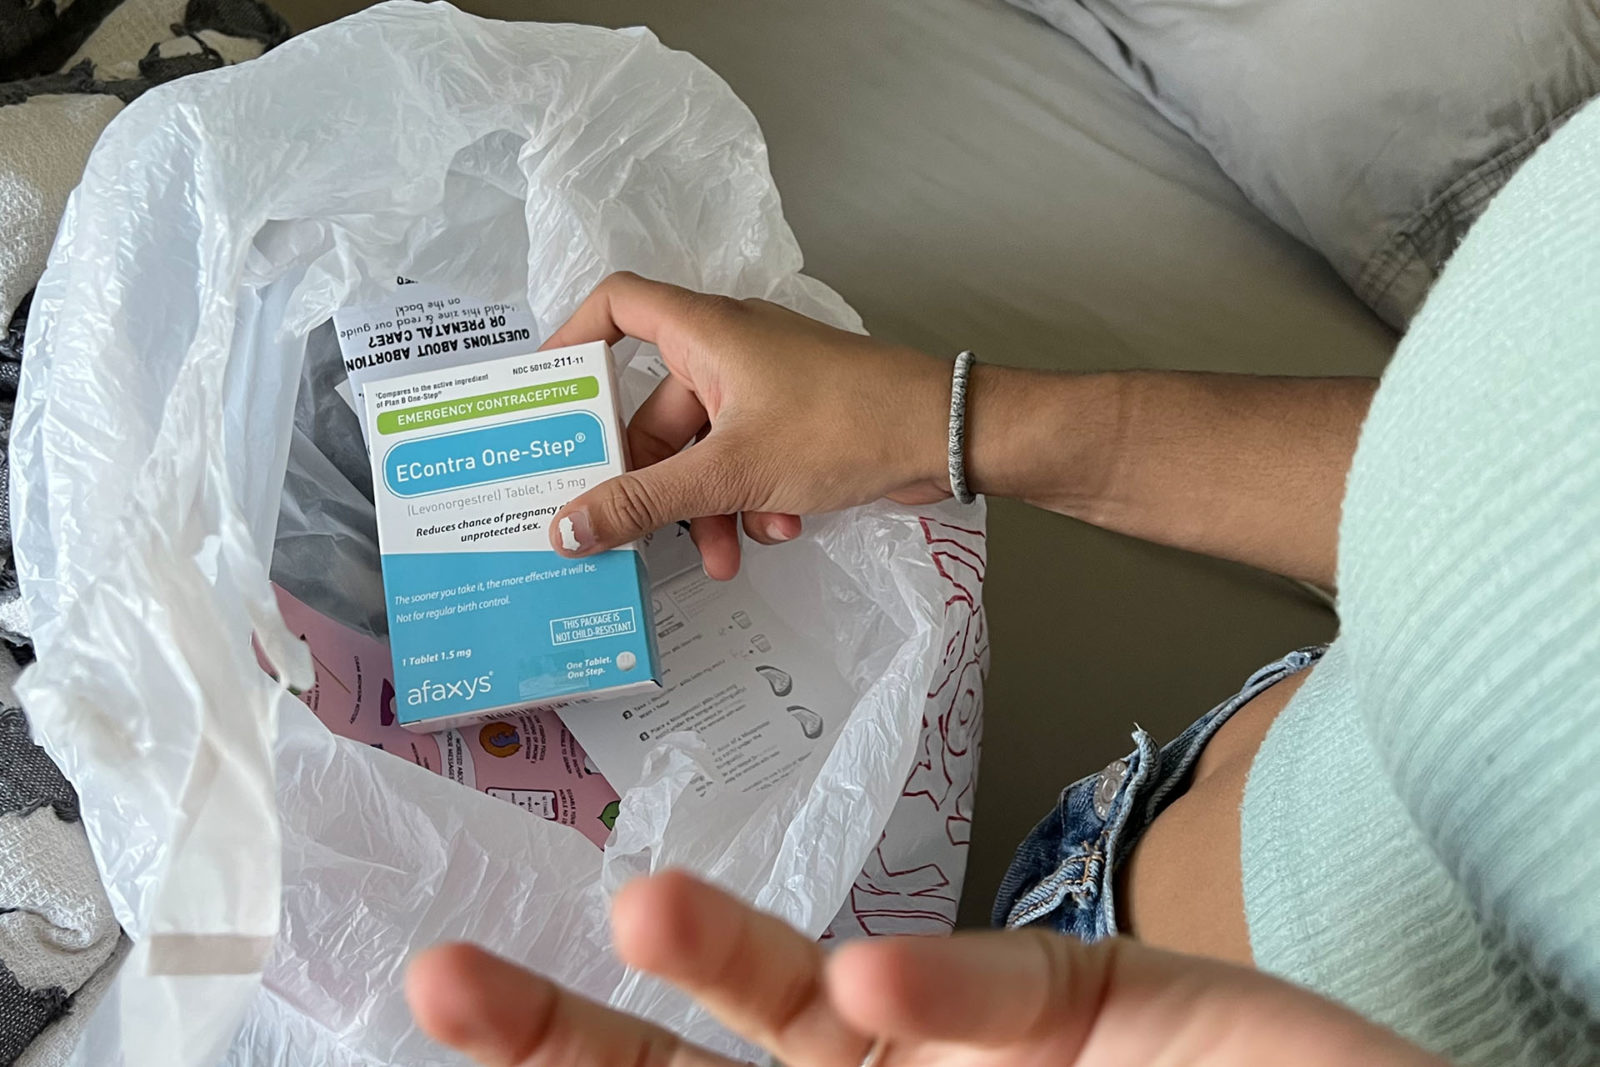 A photo of a person holding a box of emergency contraceptives